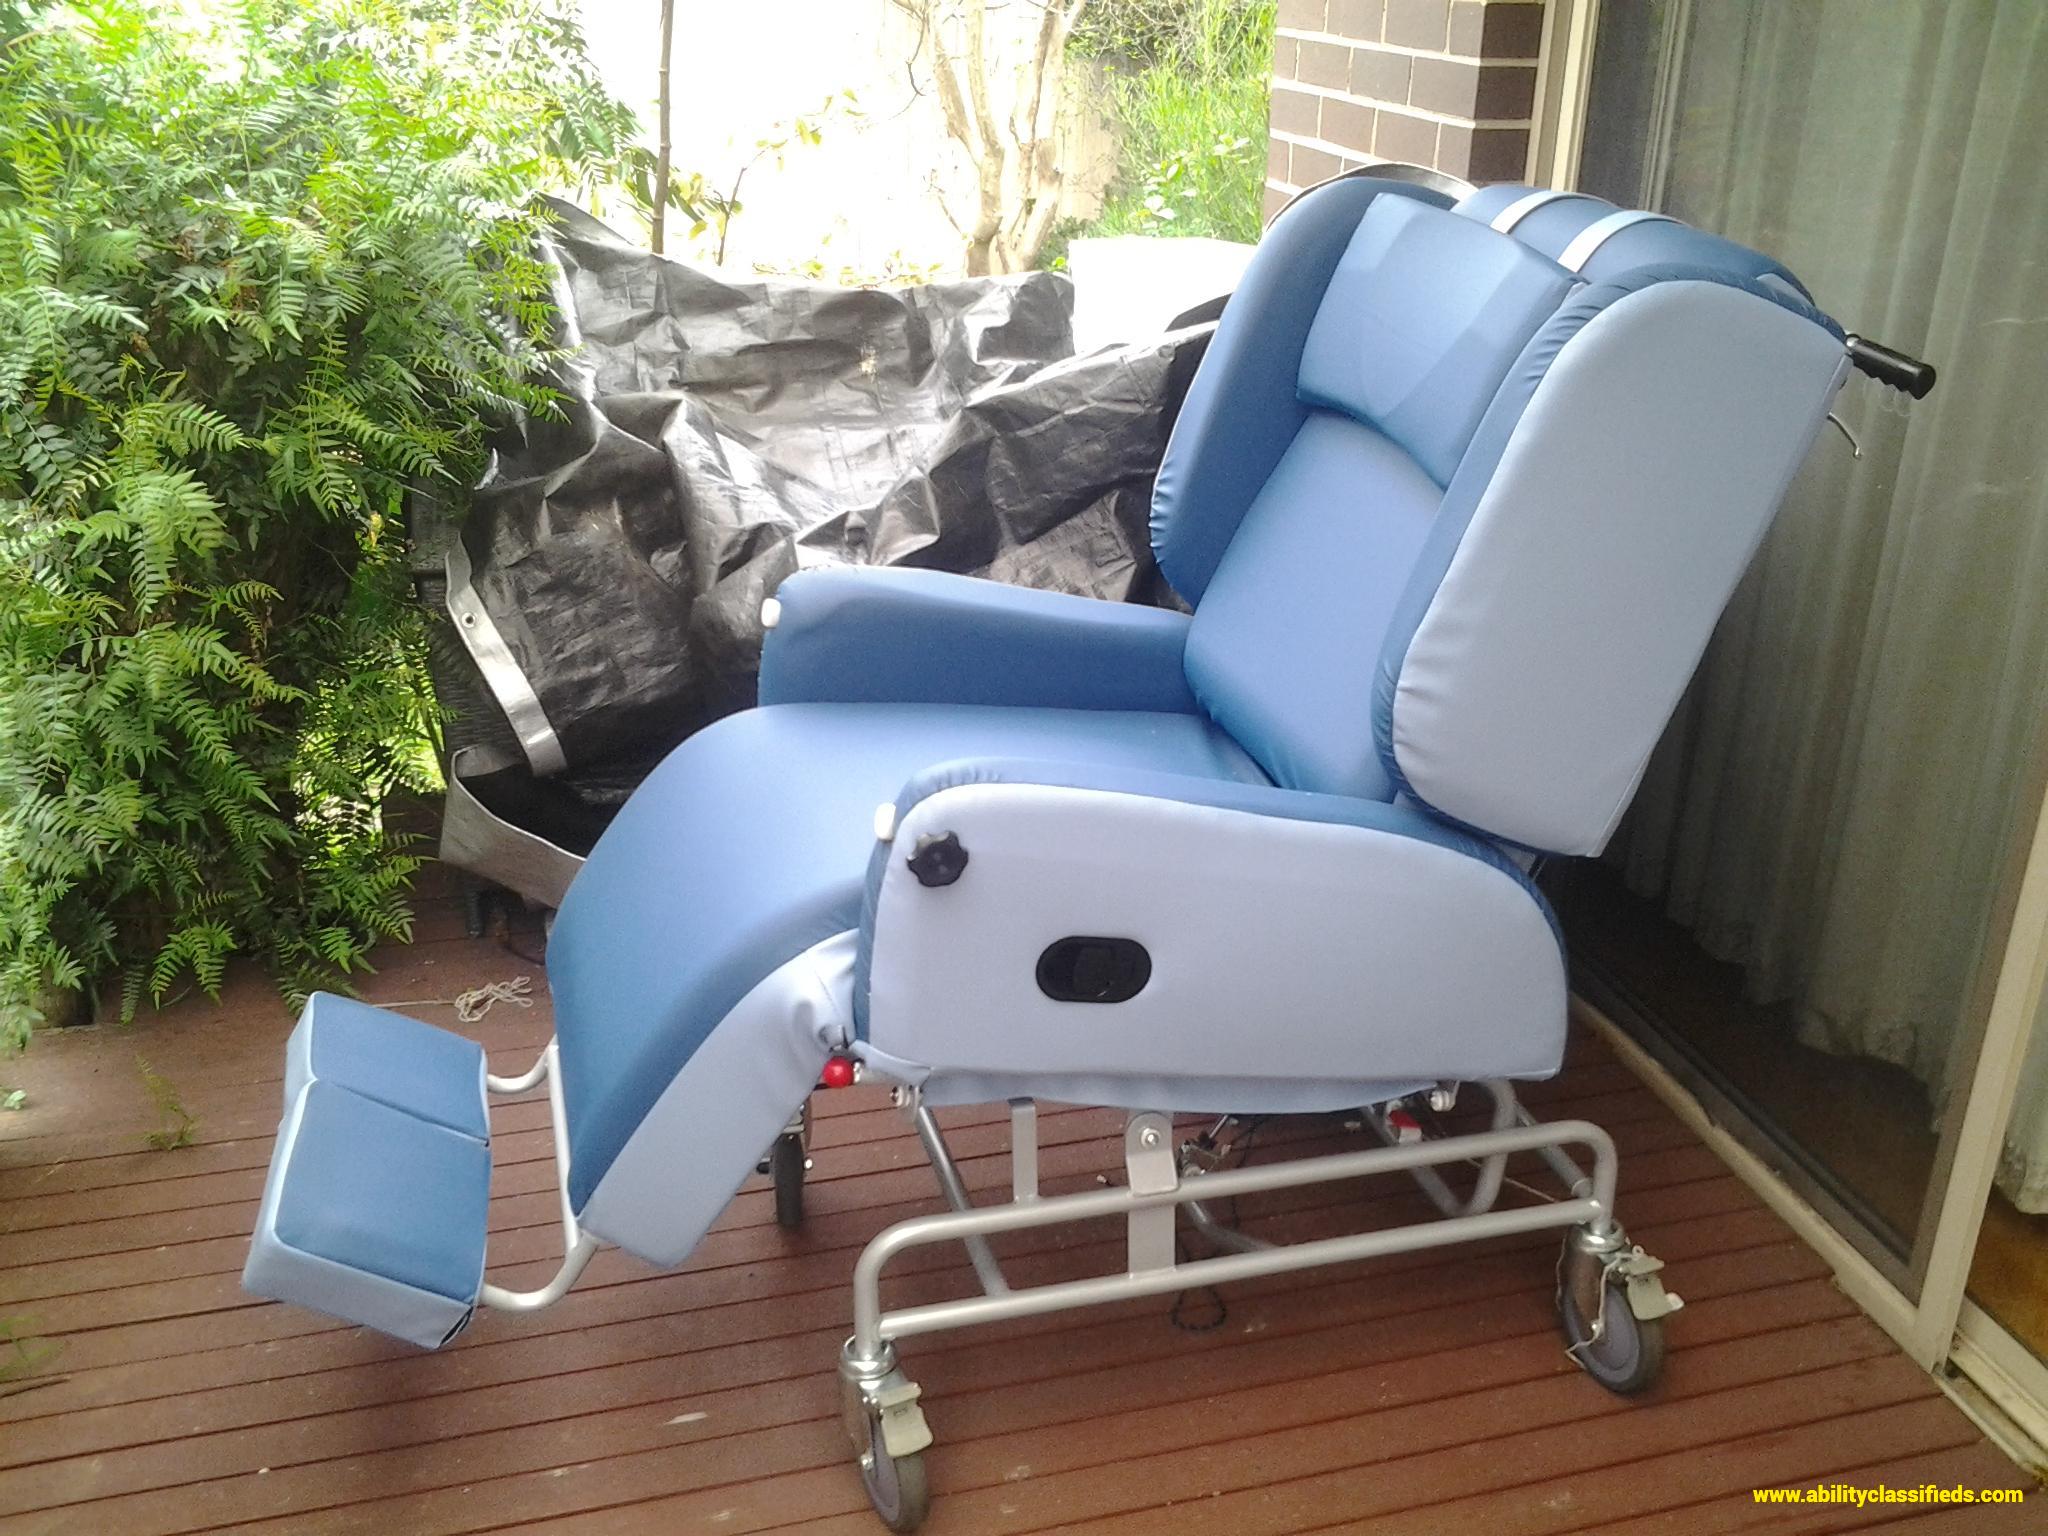 Air comfort Pressure relief chair